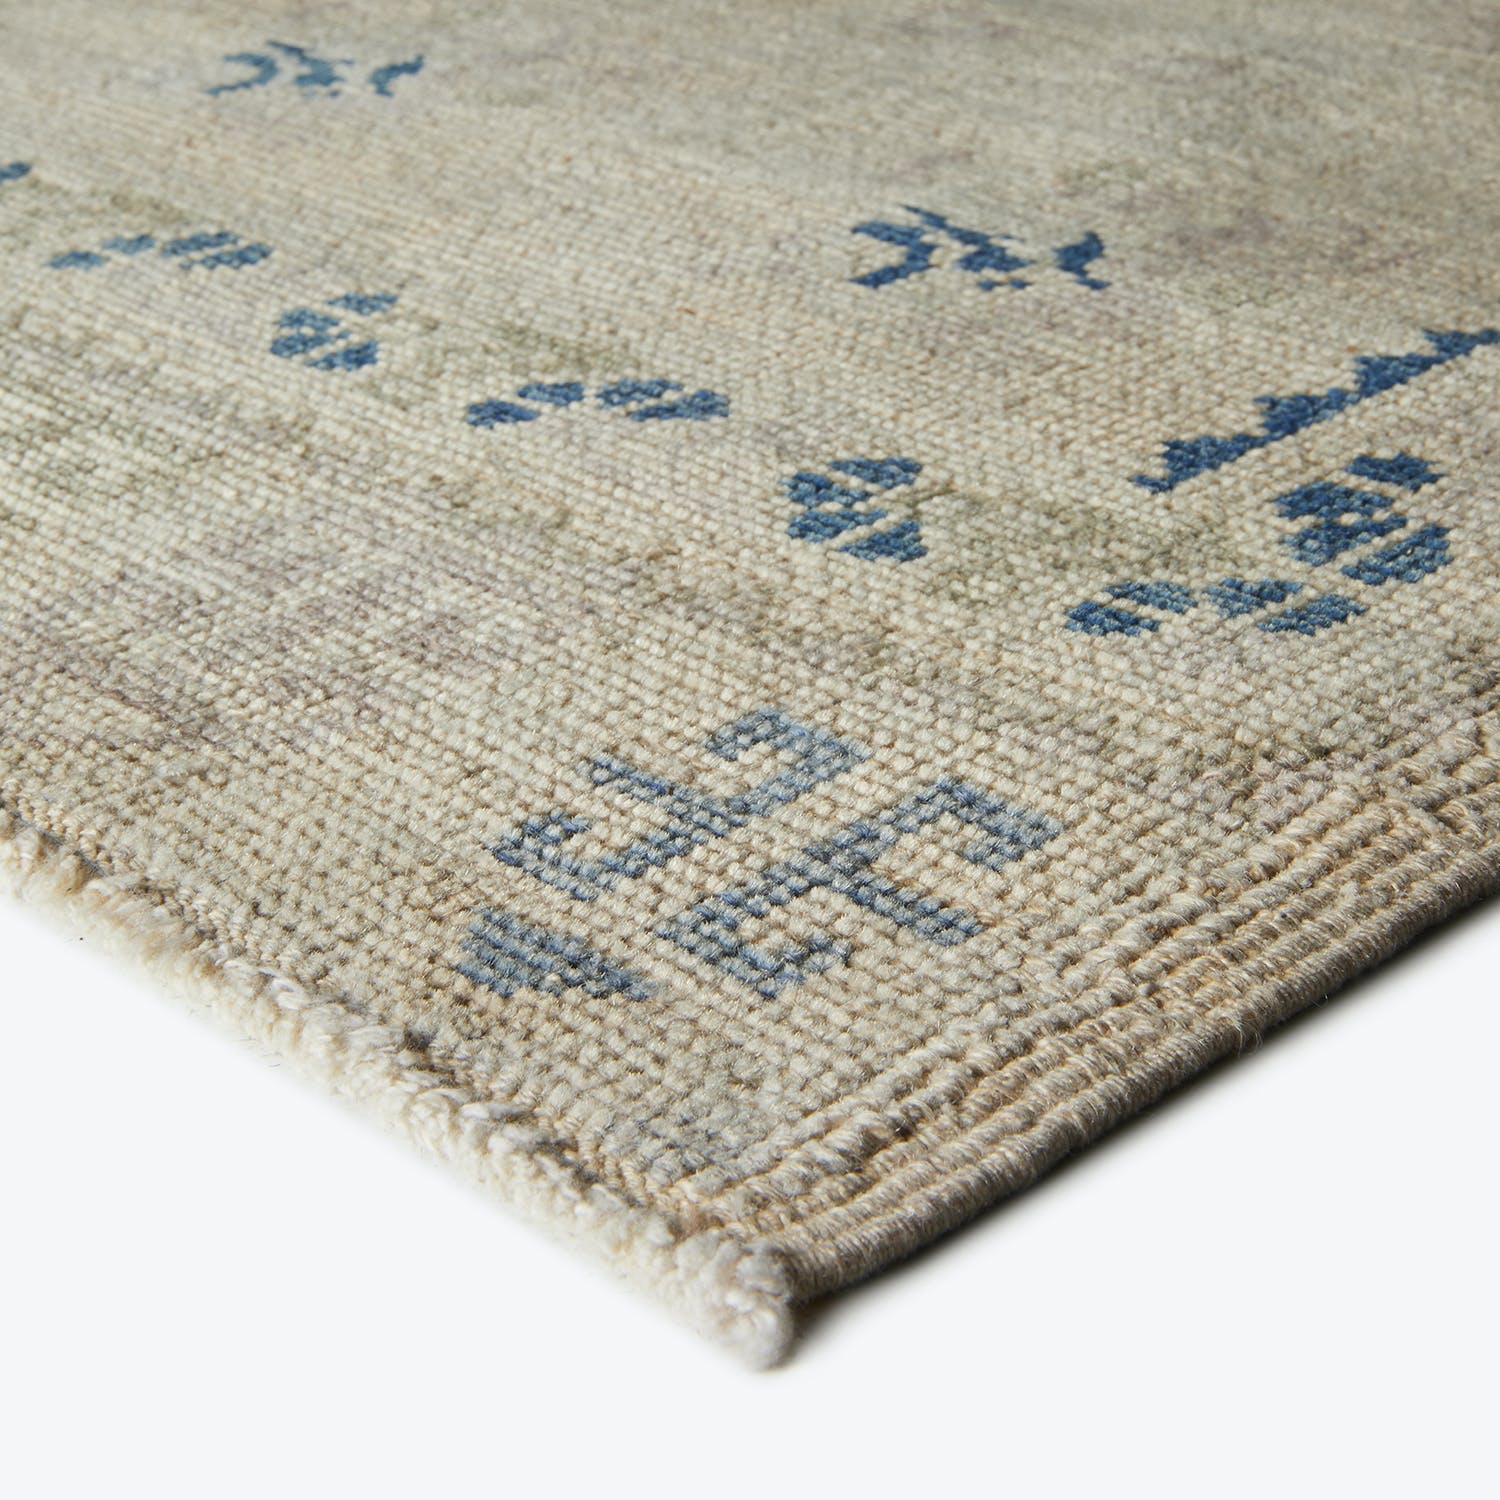 Textured woven rug with traditional blue motifs in bright environment.